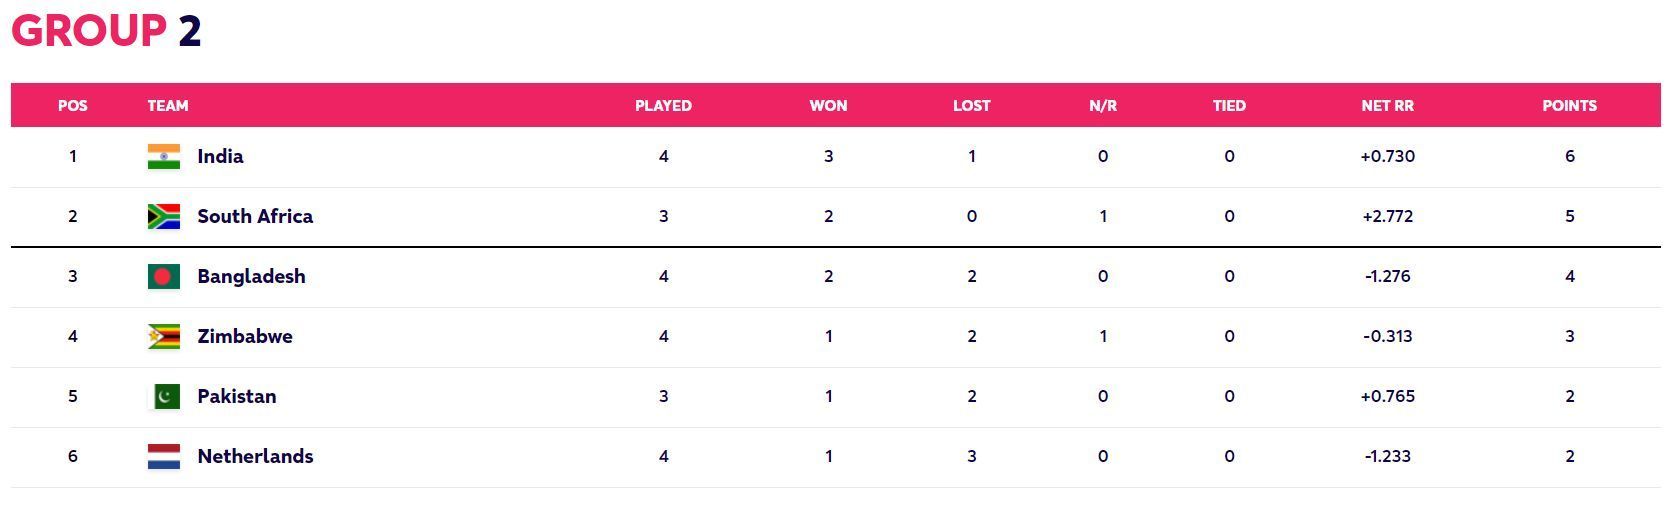 Updated Points Table after Match 35 (Image Courtesy: www.t20worldcup.com)